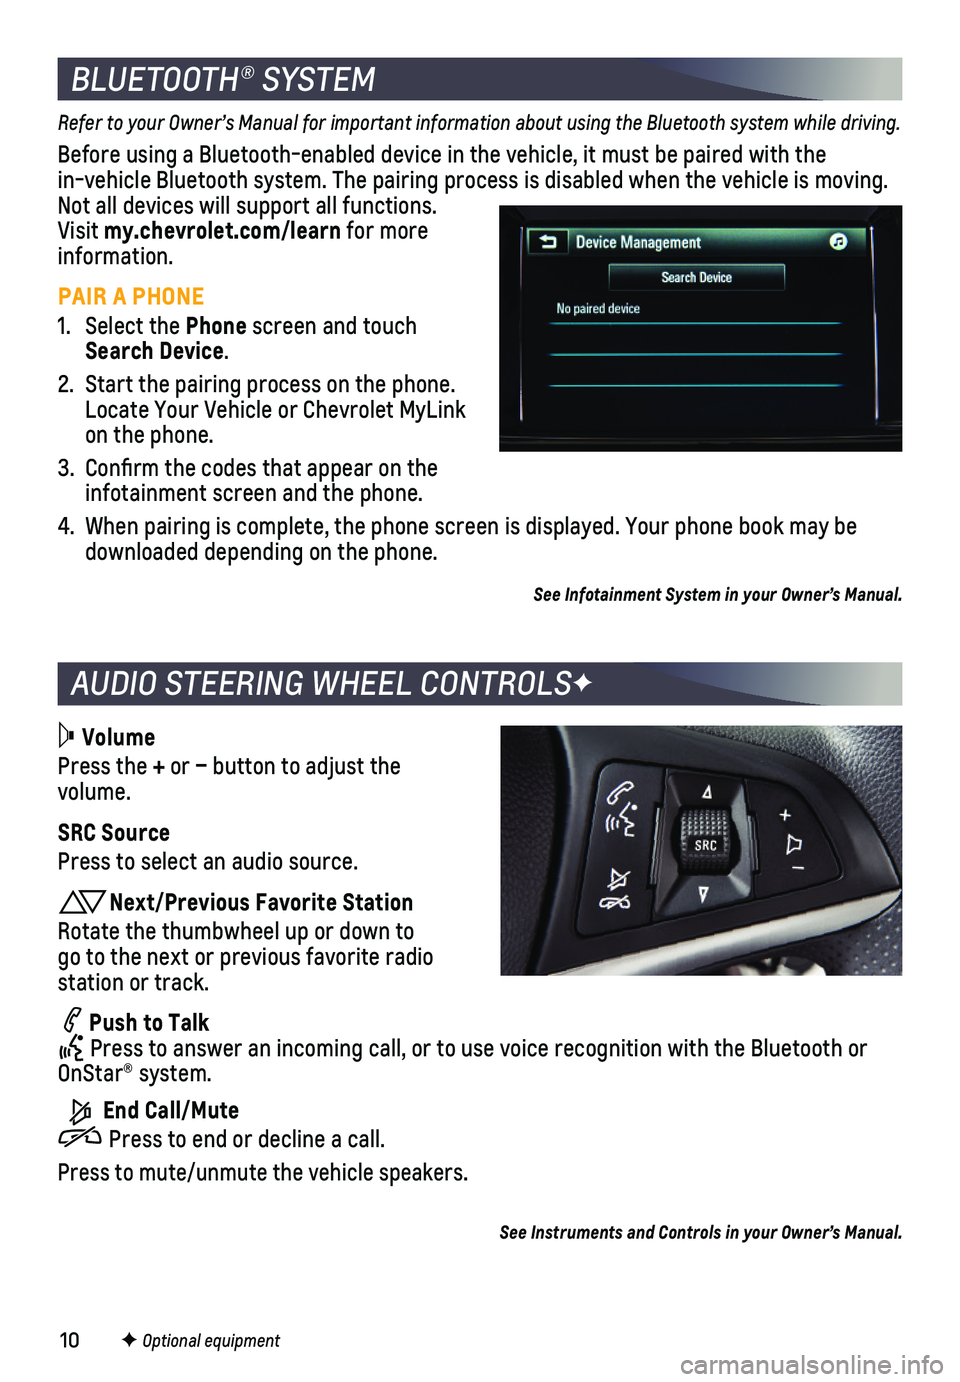 CHEVROLET SPARK 2018  Get To Know Guide 10
AUDIO STEERING WHEEL CONTROLSF
BLUETOOTH® SYSTEM
Refer to your Owner’s Manual for important information about using the Bluetooth system while driving.
Before using a Bluetooth-enabled device in